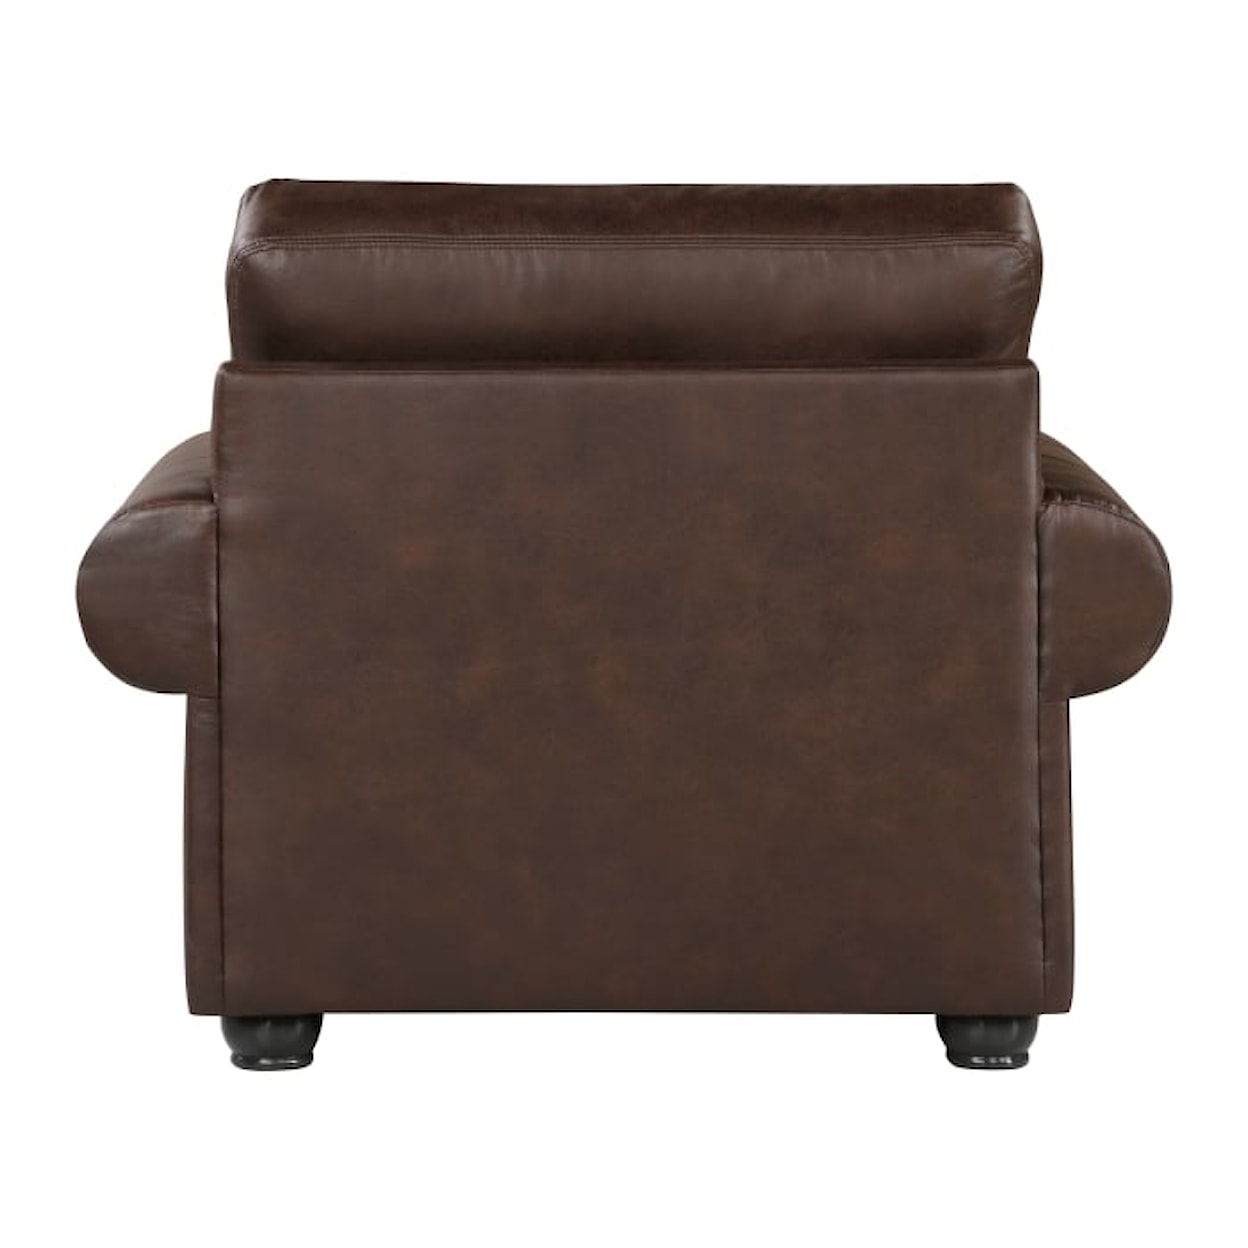 Homelegance Furniture Franklin Accent Chair